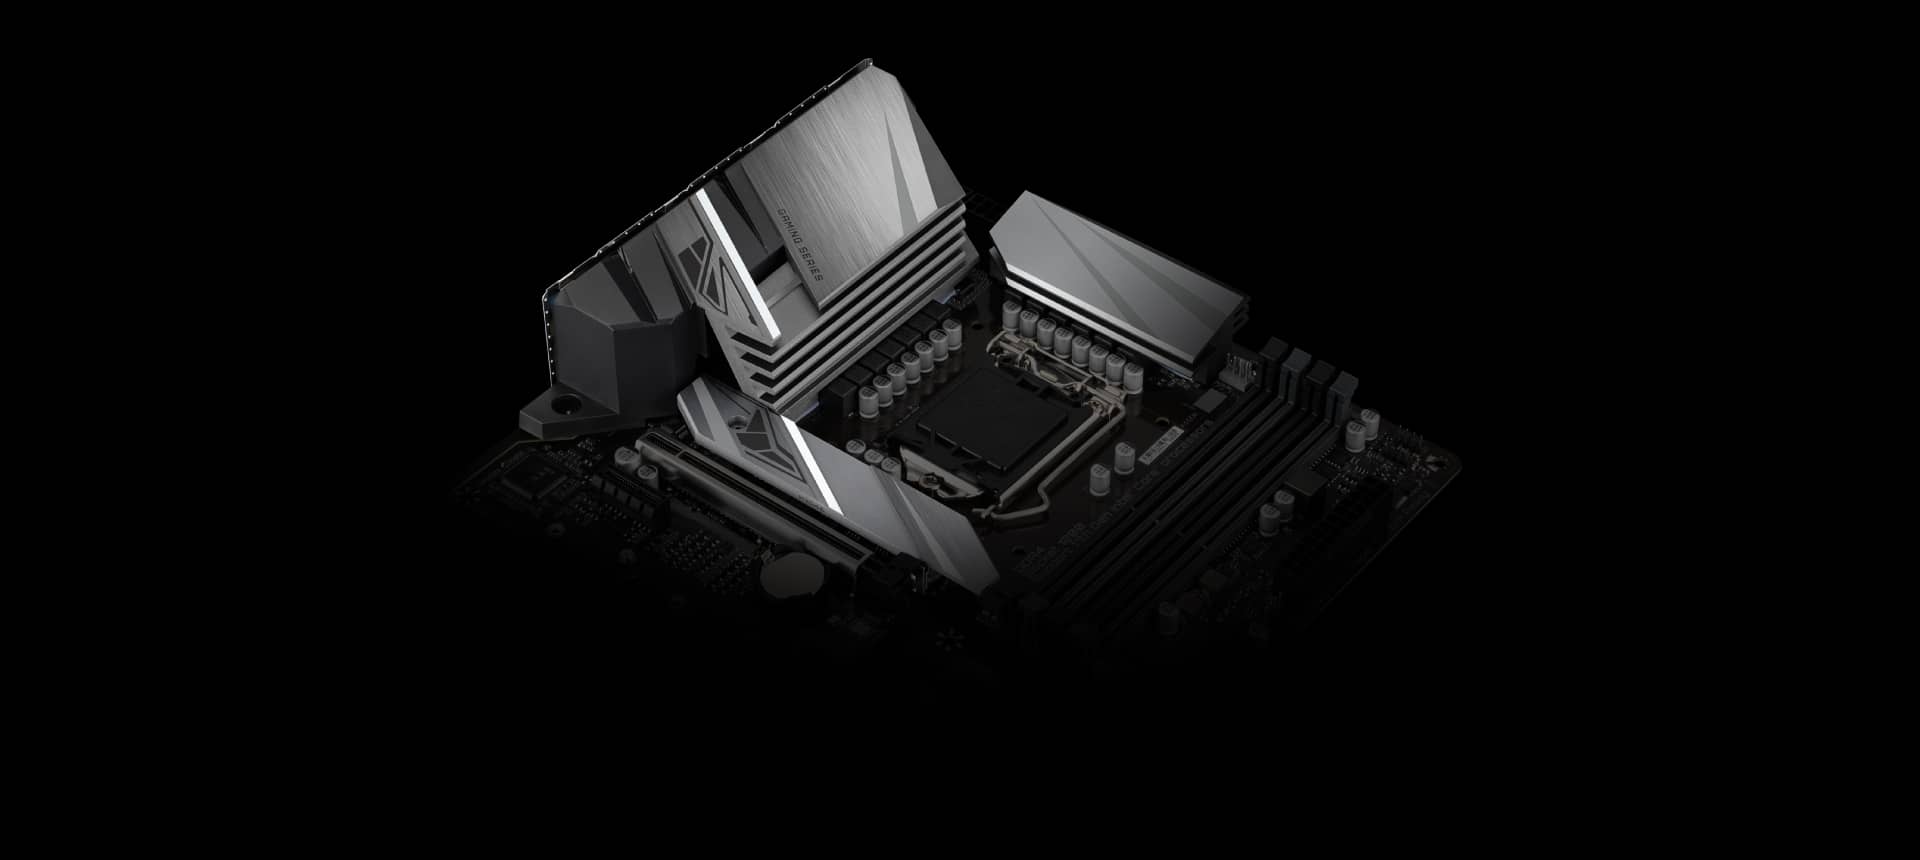 Z590M GAMING X (rev. 1.0) Key Features | Motherboard - Gigabyte